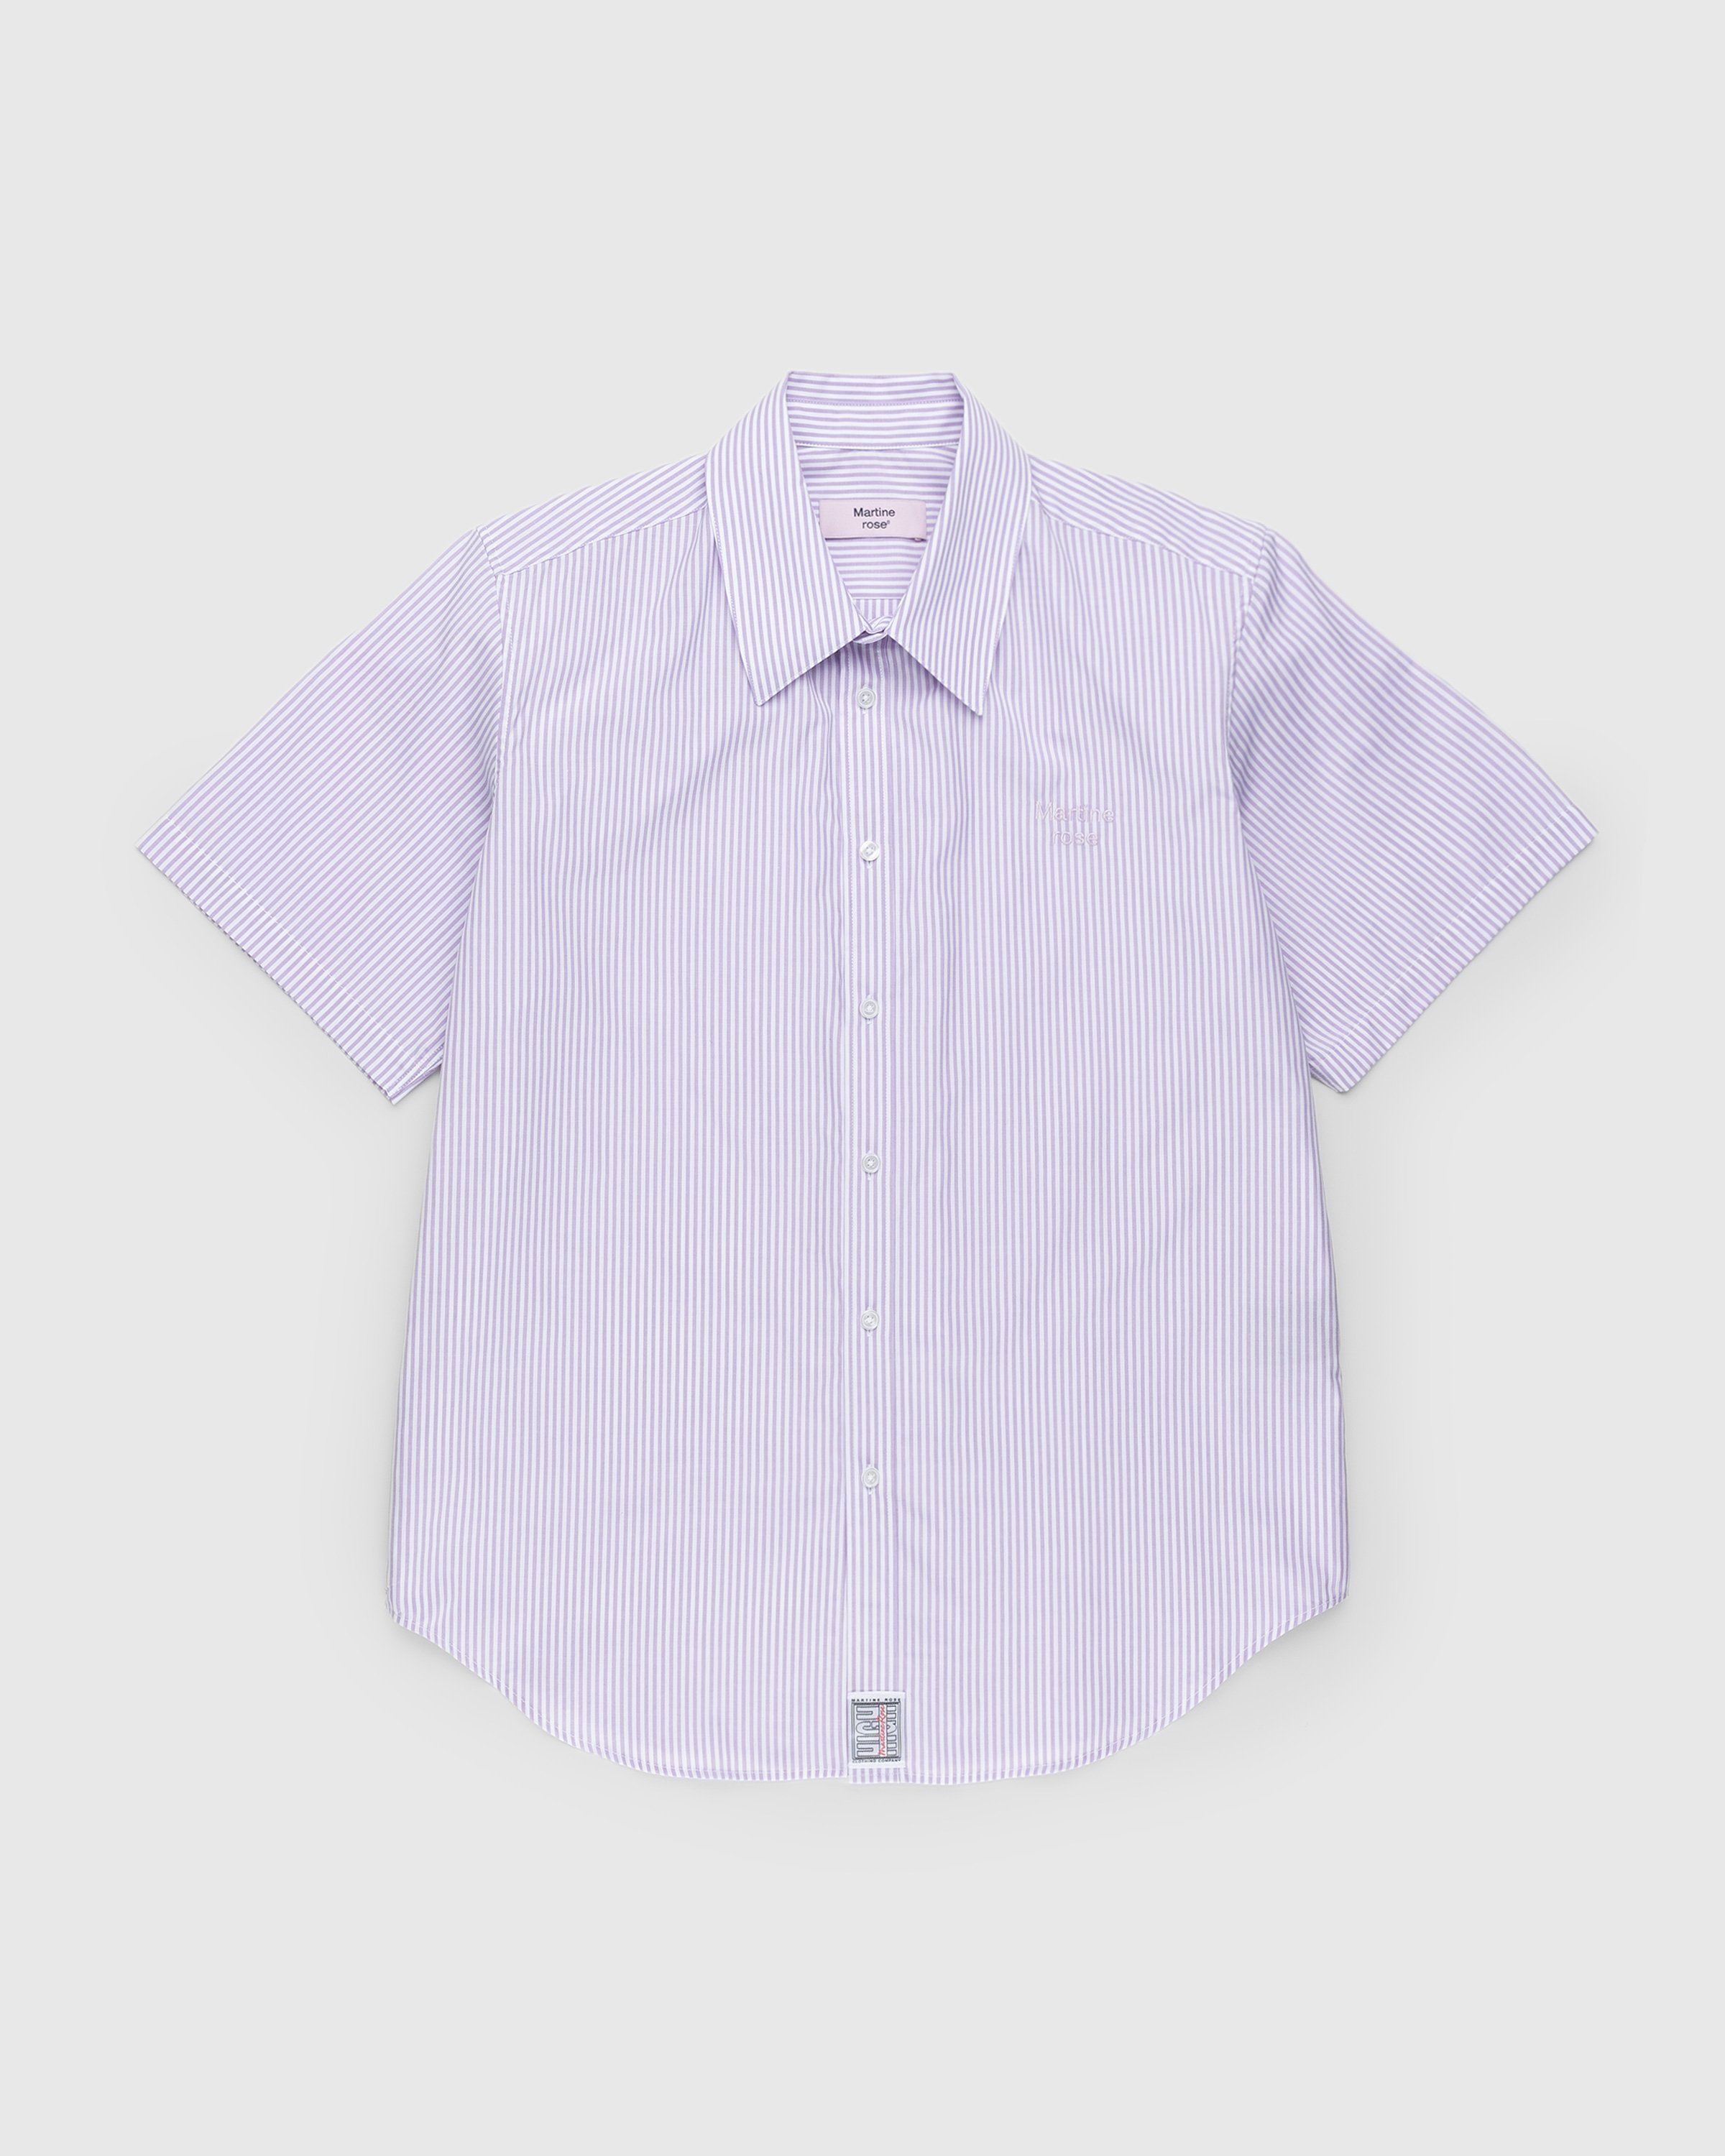 Martine Rose - Classic Short-Sleeve Button-Down Shirt Lilac and White Stripe - Clothing - Purple - Image 1